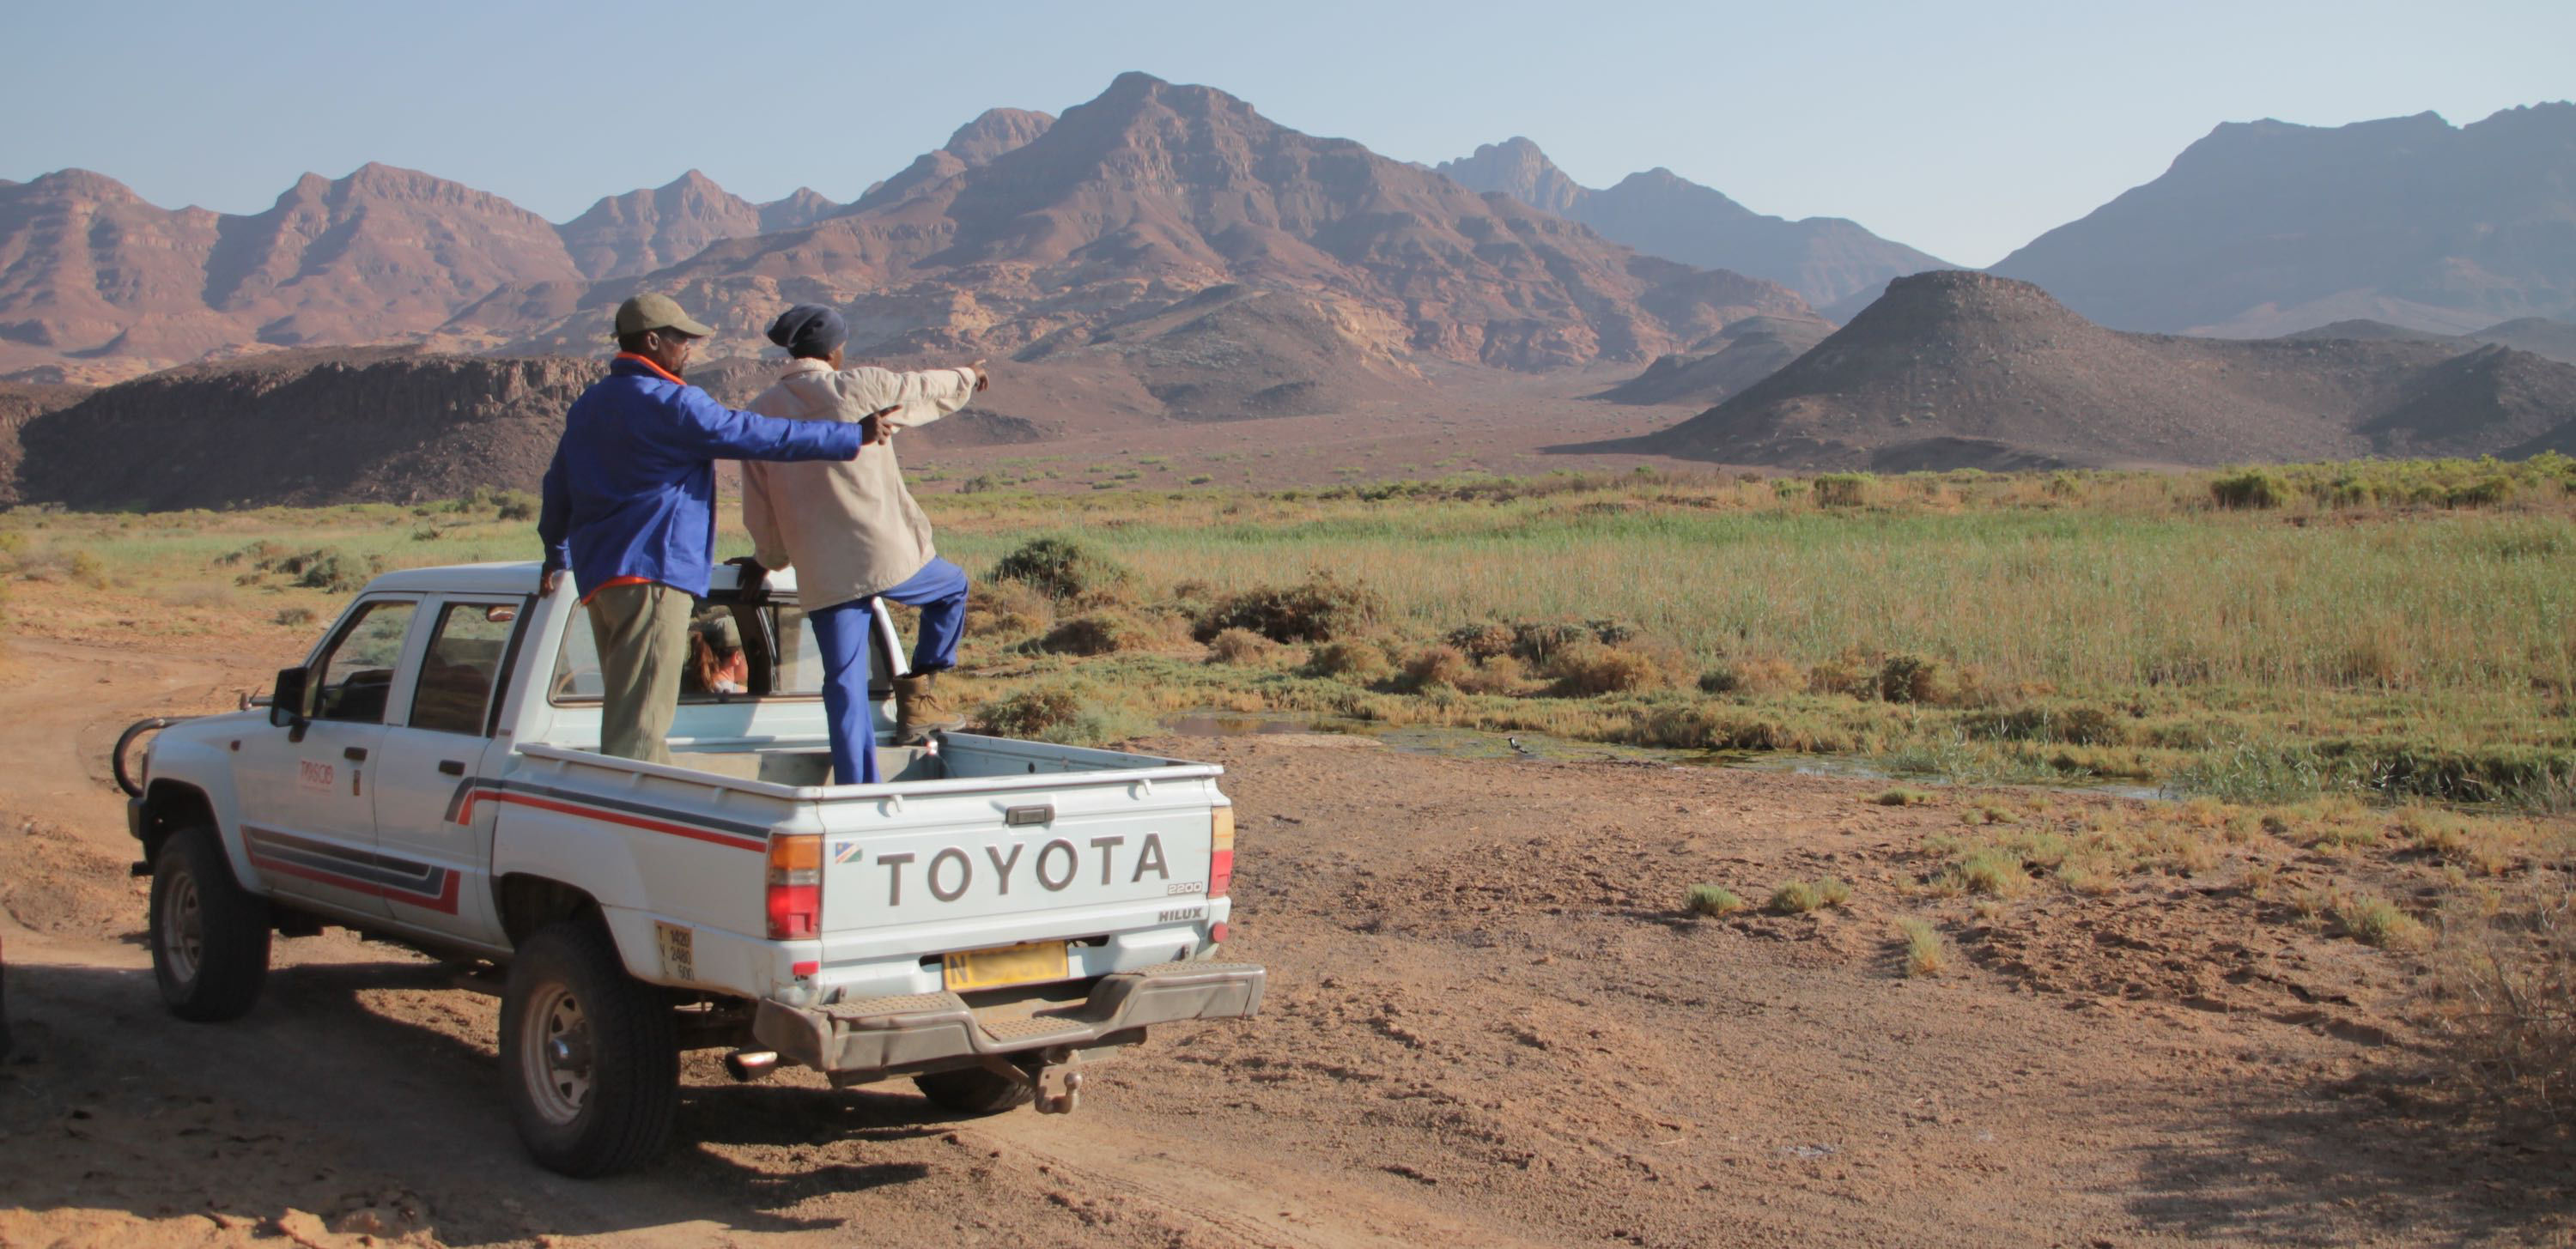 Two men counting animals from the back of a Toyota bakkie.